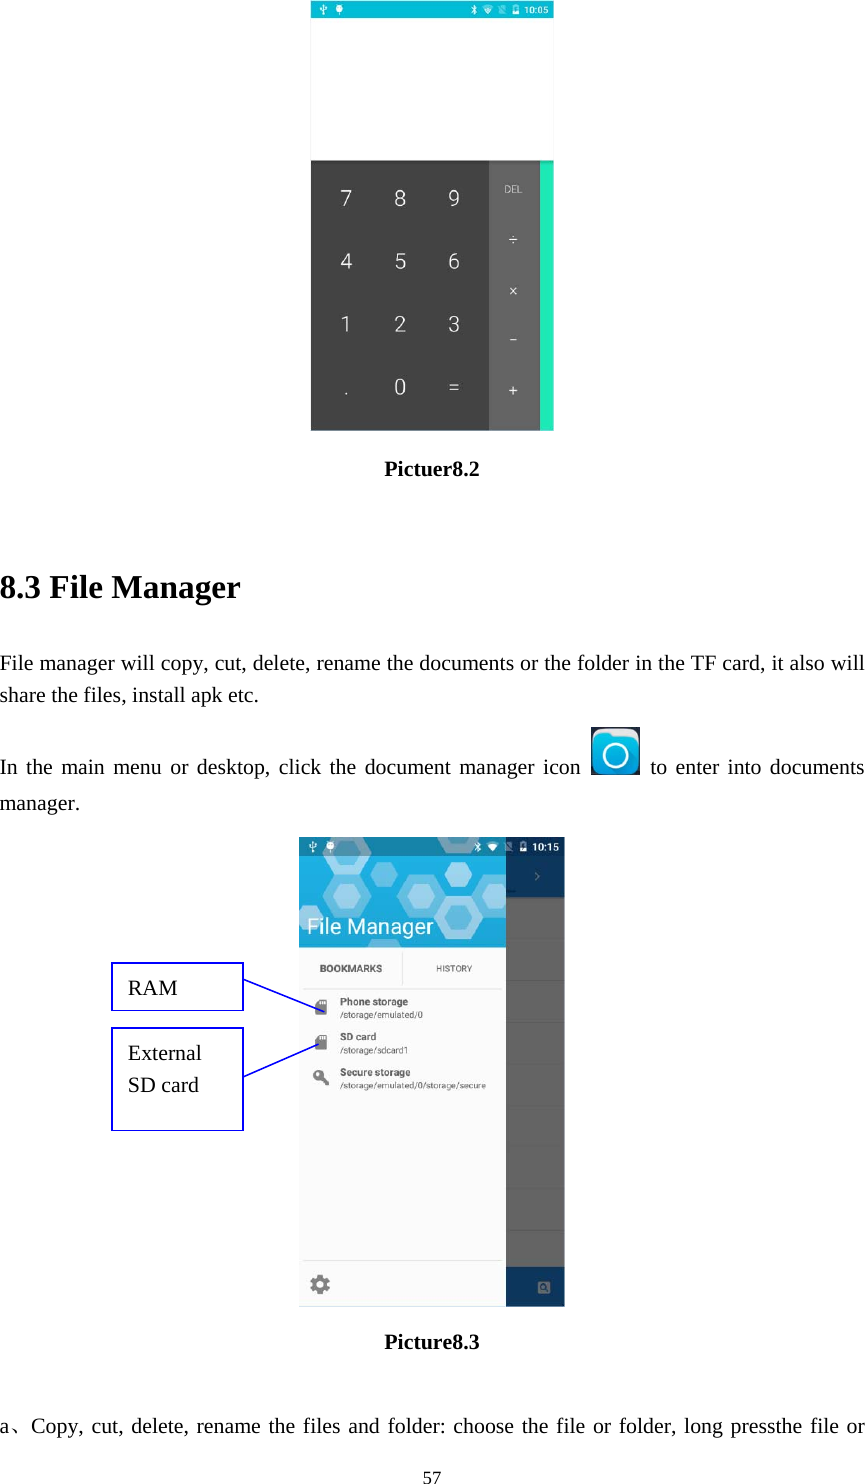     57 Pictuer8.2  8.3 File Manager File manager will copy, cut, delete, rename the documents or the folder in the TF card, it also will share the files, install apk etc. In the main menu or desktop, click the document manager icon   to enter into documents manager.  Picture8.3  a、Copy, cut, delete, rename the files and folder: choose the file or folder, long pressthe file or RAM External SD card 